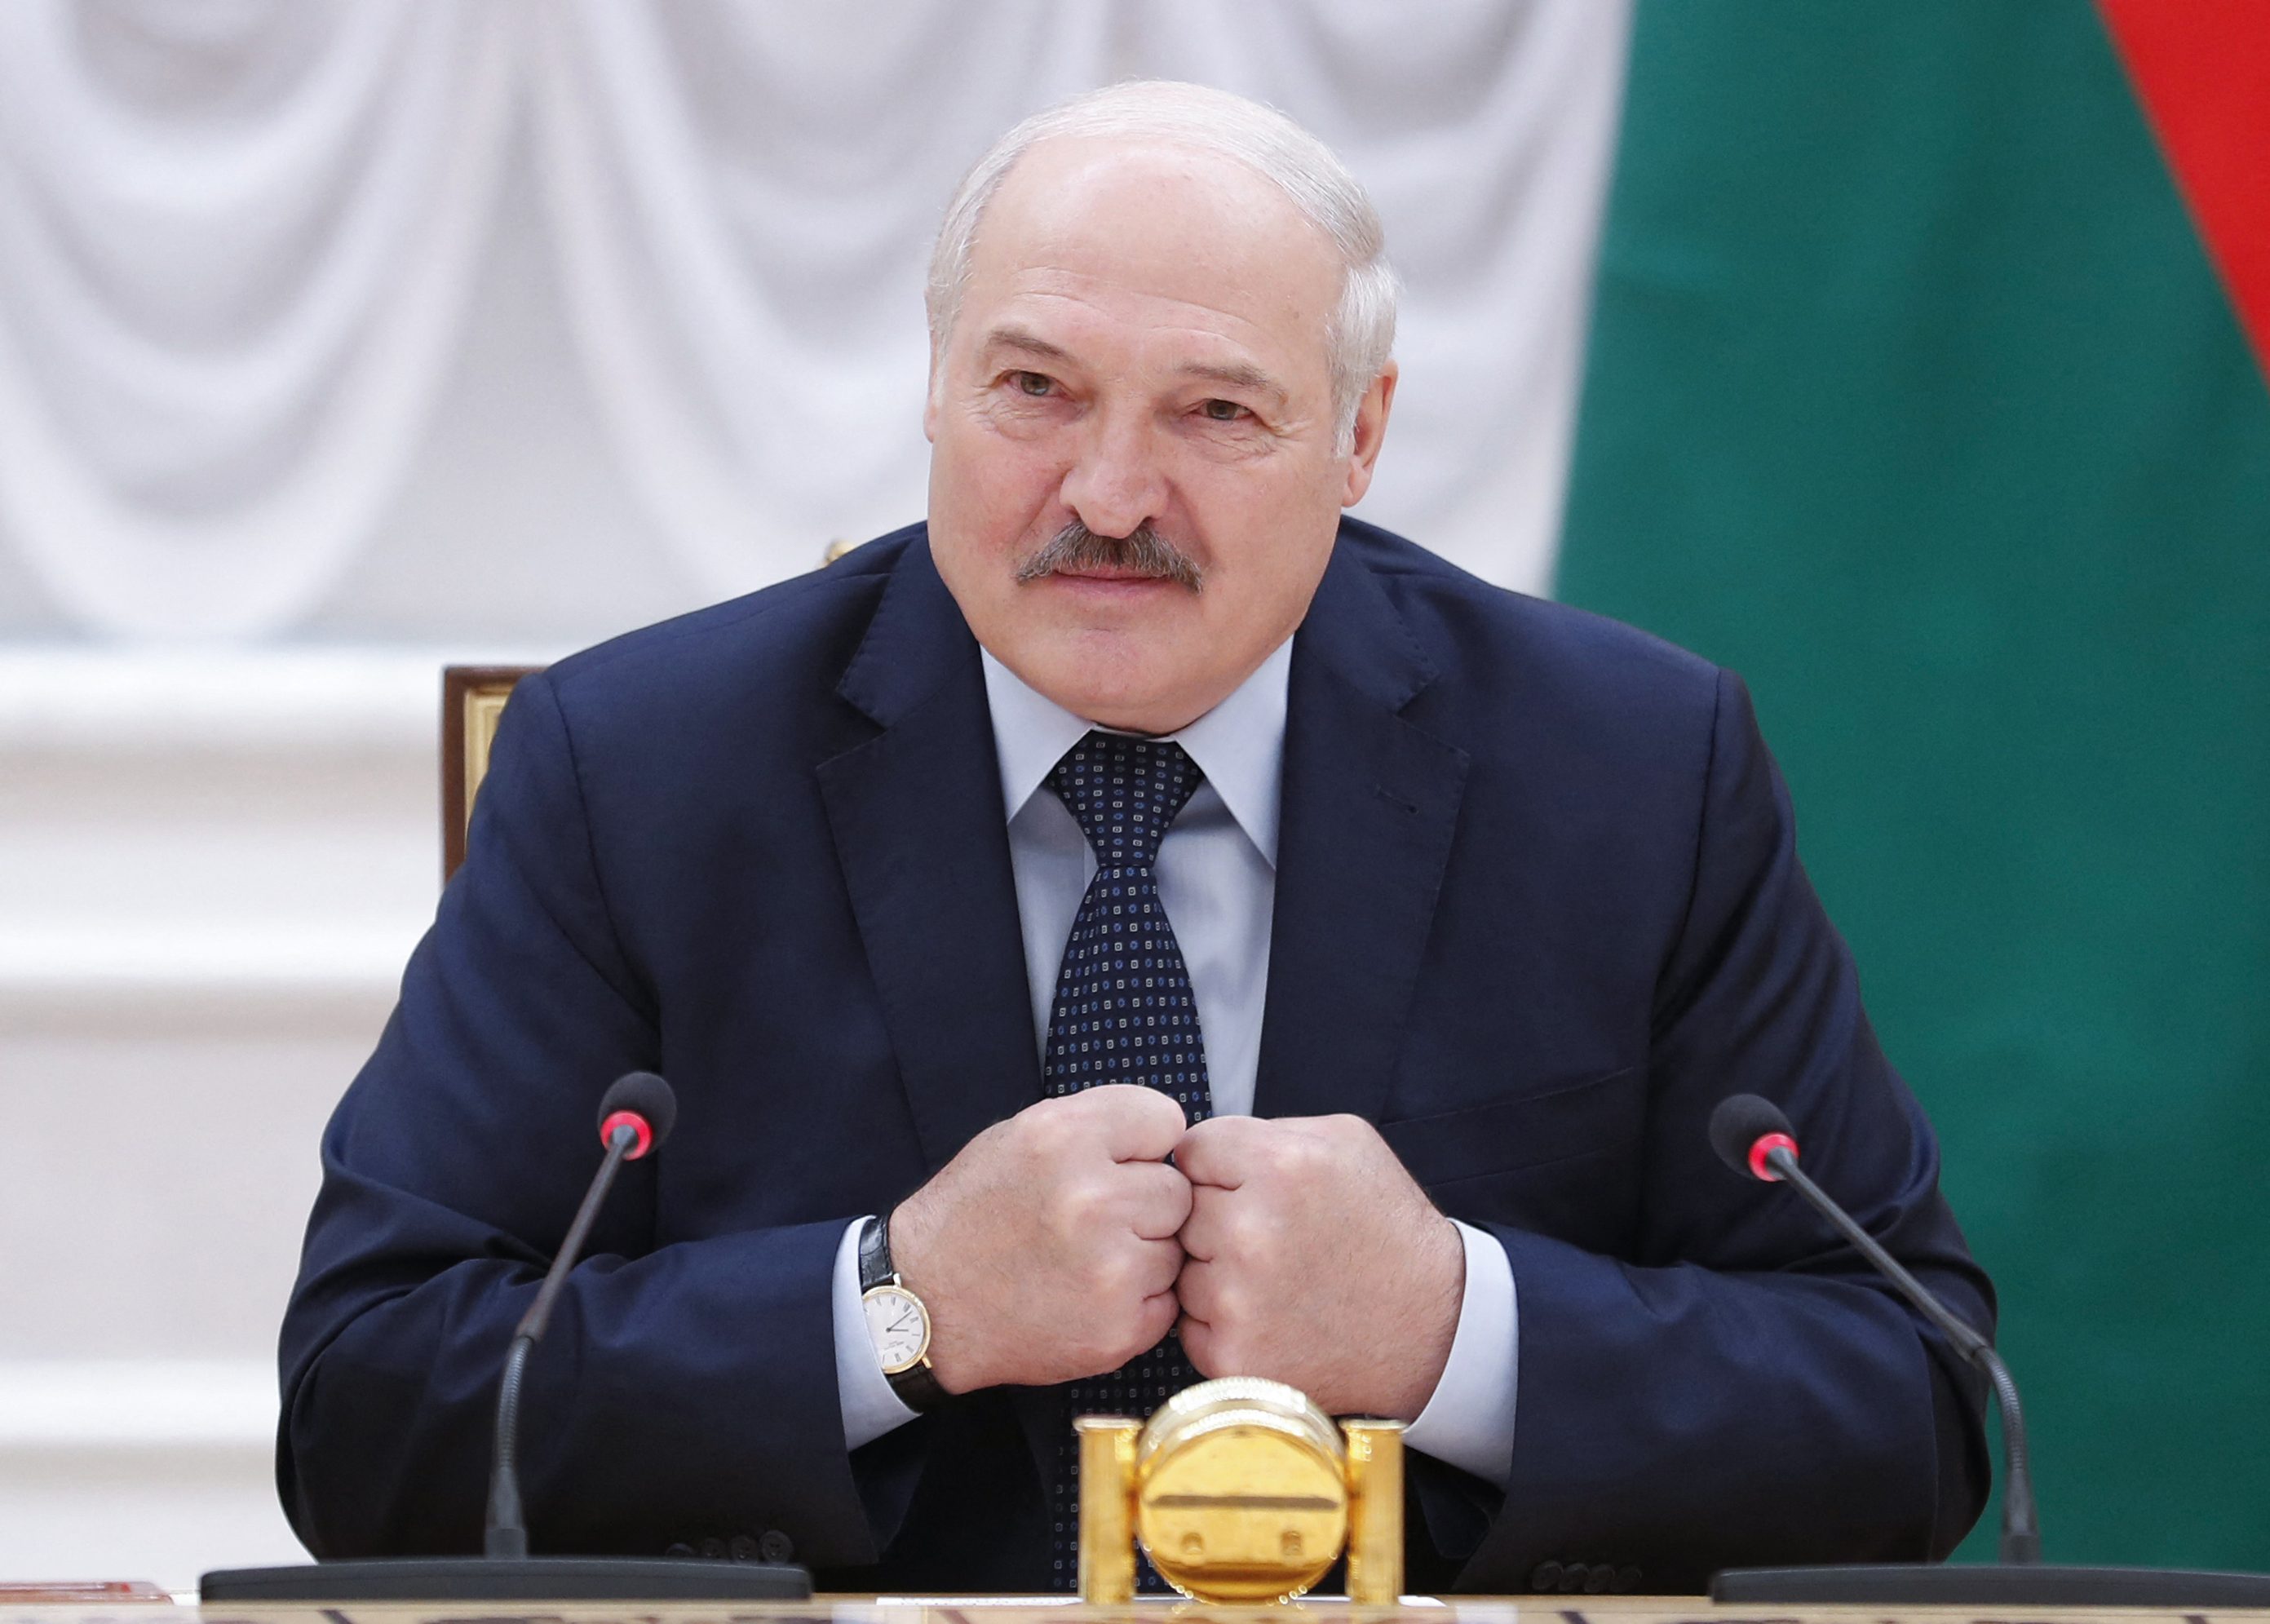 Belarusian President Alexander Lukashenko speaks during a meeting with Commonwealth of Independent States officials in Minsk on May 28.